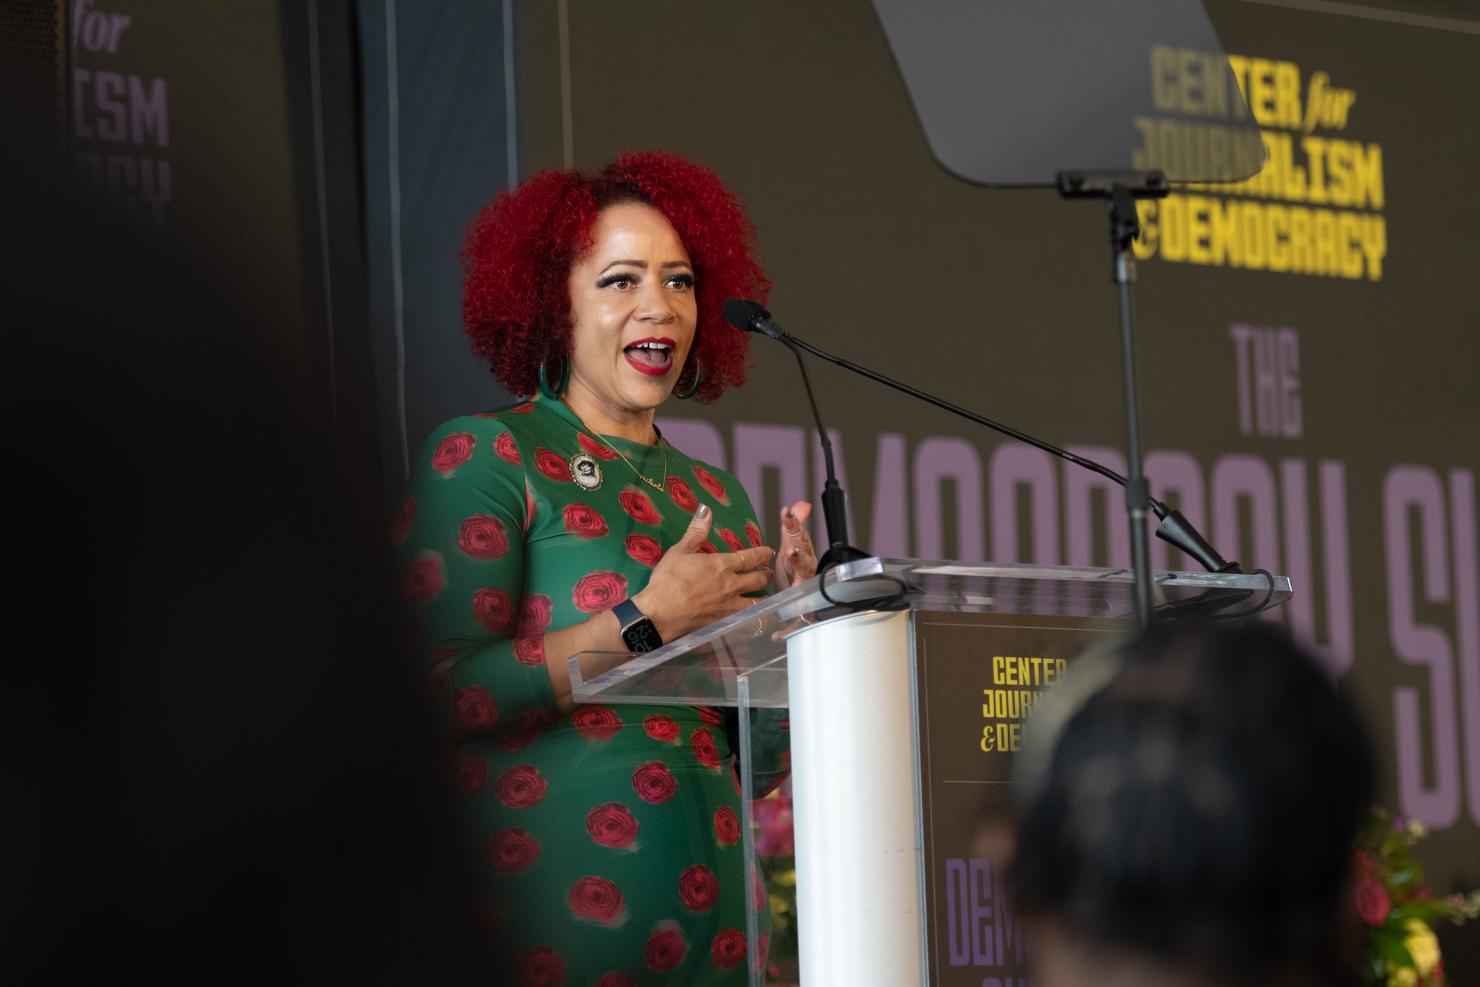 Nikole Hannah-Jones gives the welcome during “The Democracy Summit”, hosted by The Center for Journalism & Democracy at Howard University. It is the first-of-its-kind academic center committed to strengthening historically-informed, pro-democracy journalism. The Center is led by founder Nikole Hannah-Jones, the Knight Chair in Race and Journalism. -Imagine Photography